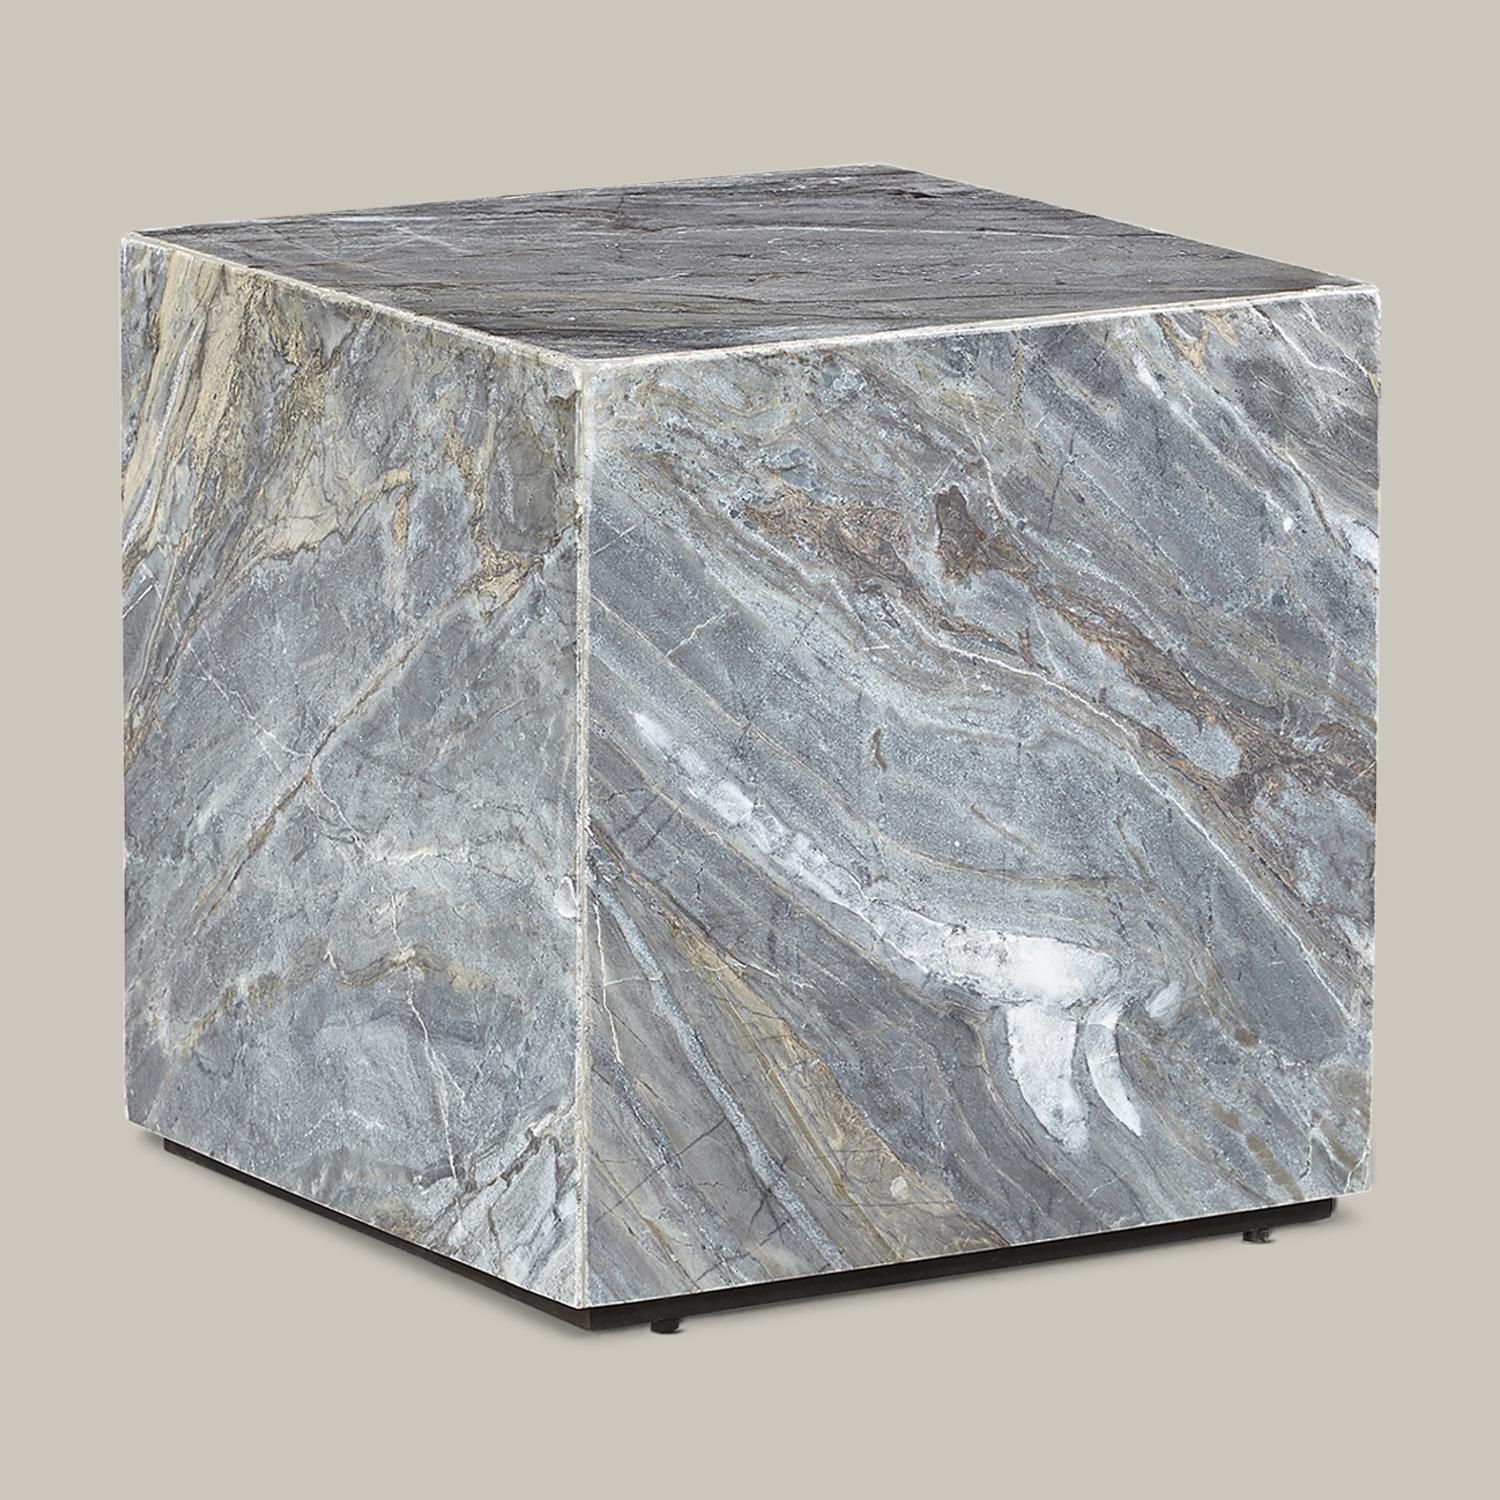 A solid blue-grey marble cube forms a multi-functional design object for use as a side table, cocktail table or decorative pedestal. Handmade by artisans in Vietnam, this piece adds a novel weight to any interior.

